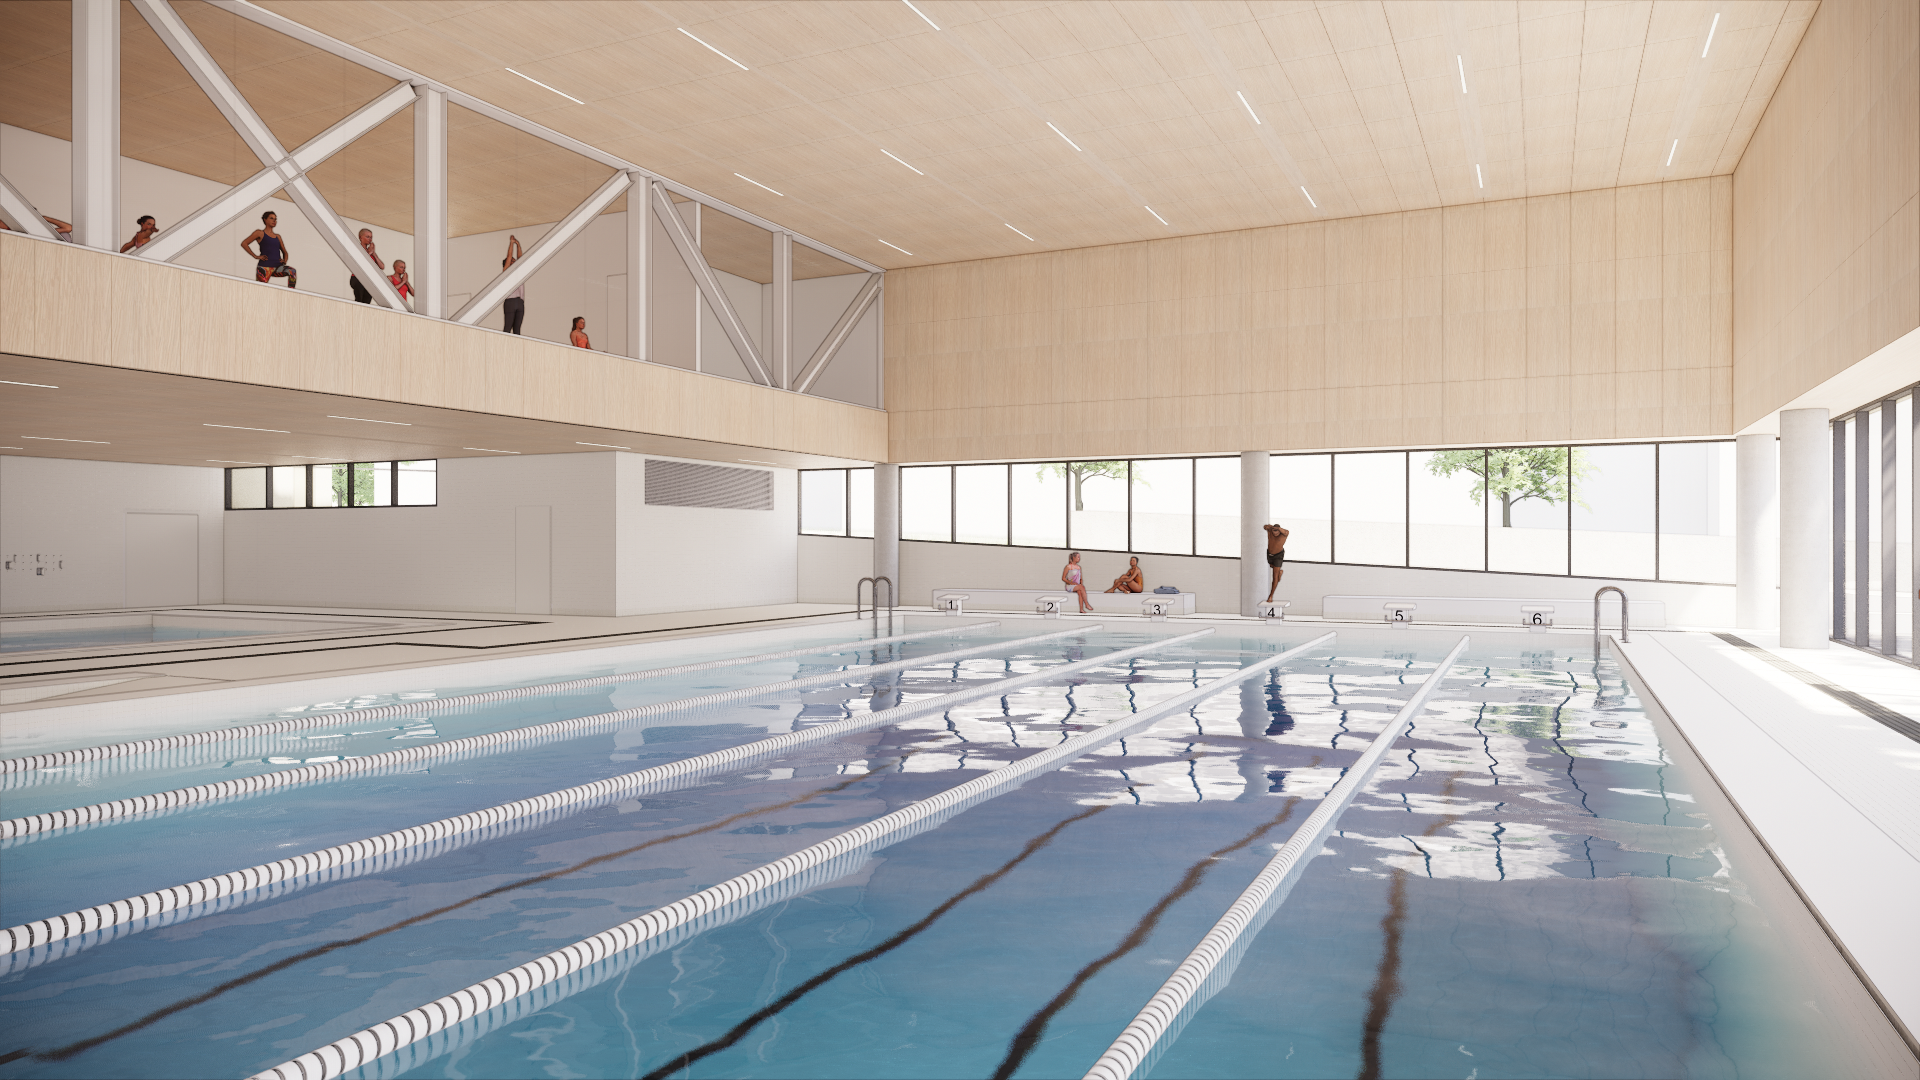 Rendering view of the pool area within the Etobicoke Civic Centre.